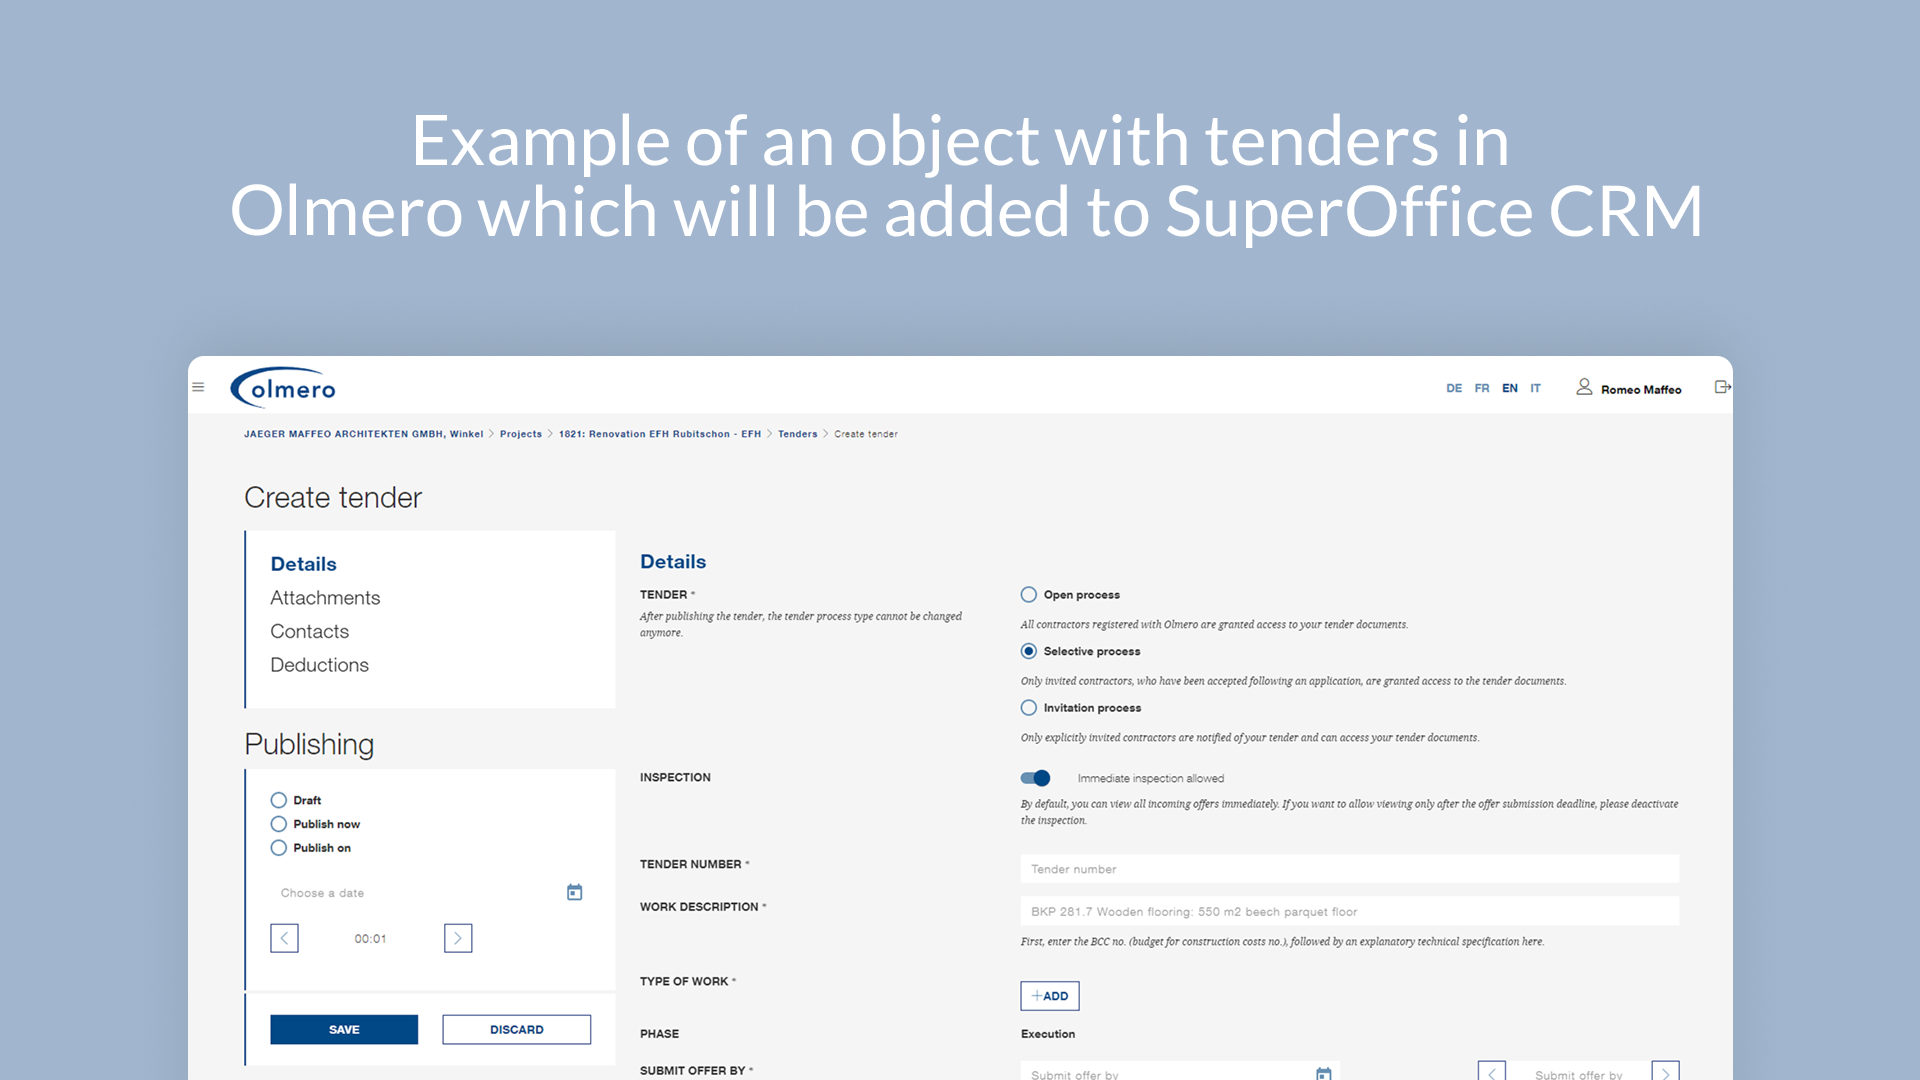 3. Example of an object with tenders in Olmero which will be added to SuperOffice CRM